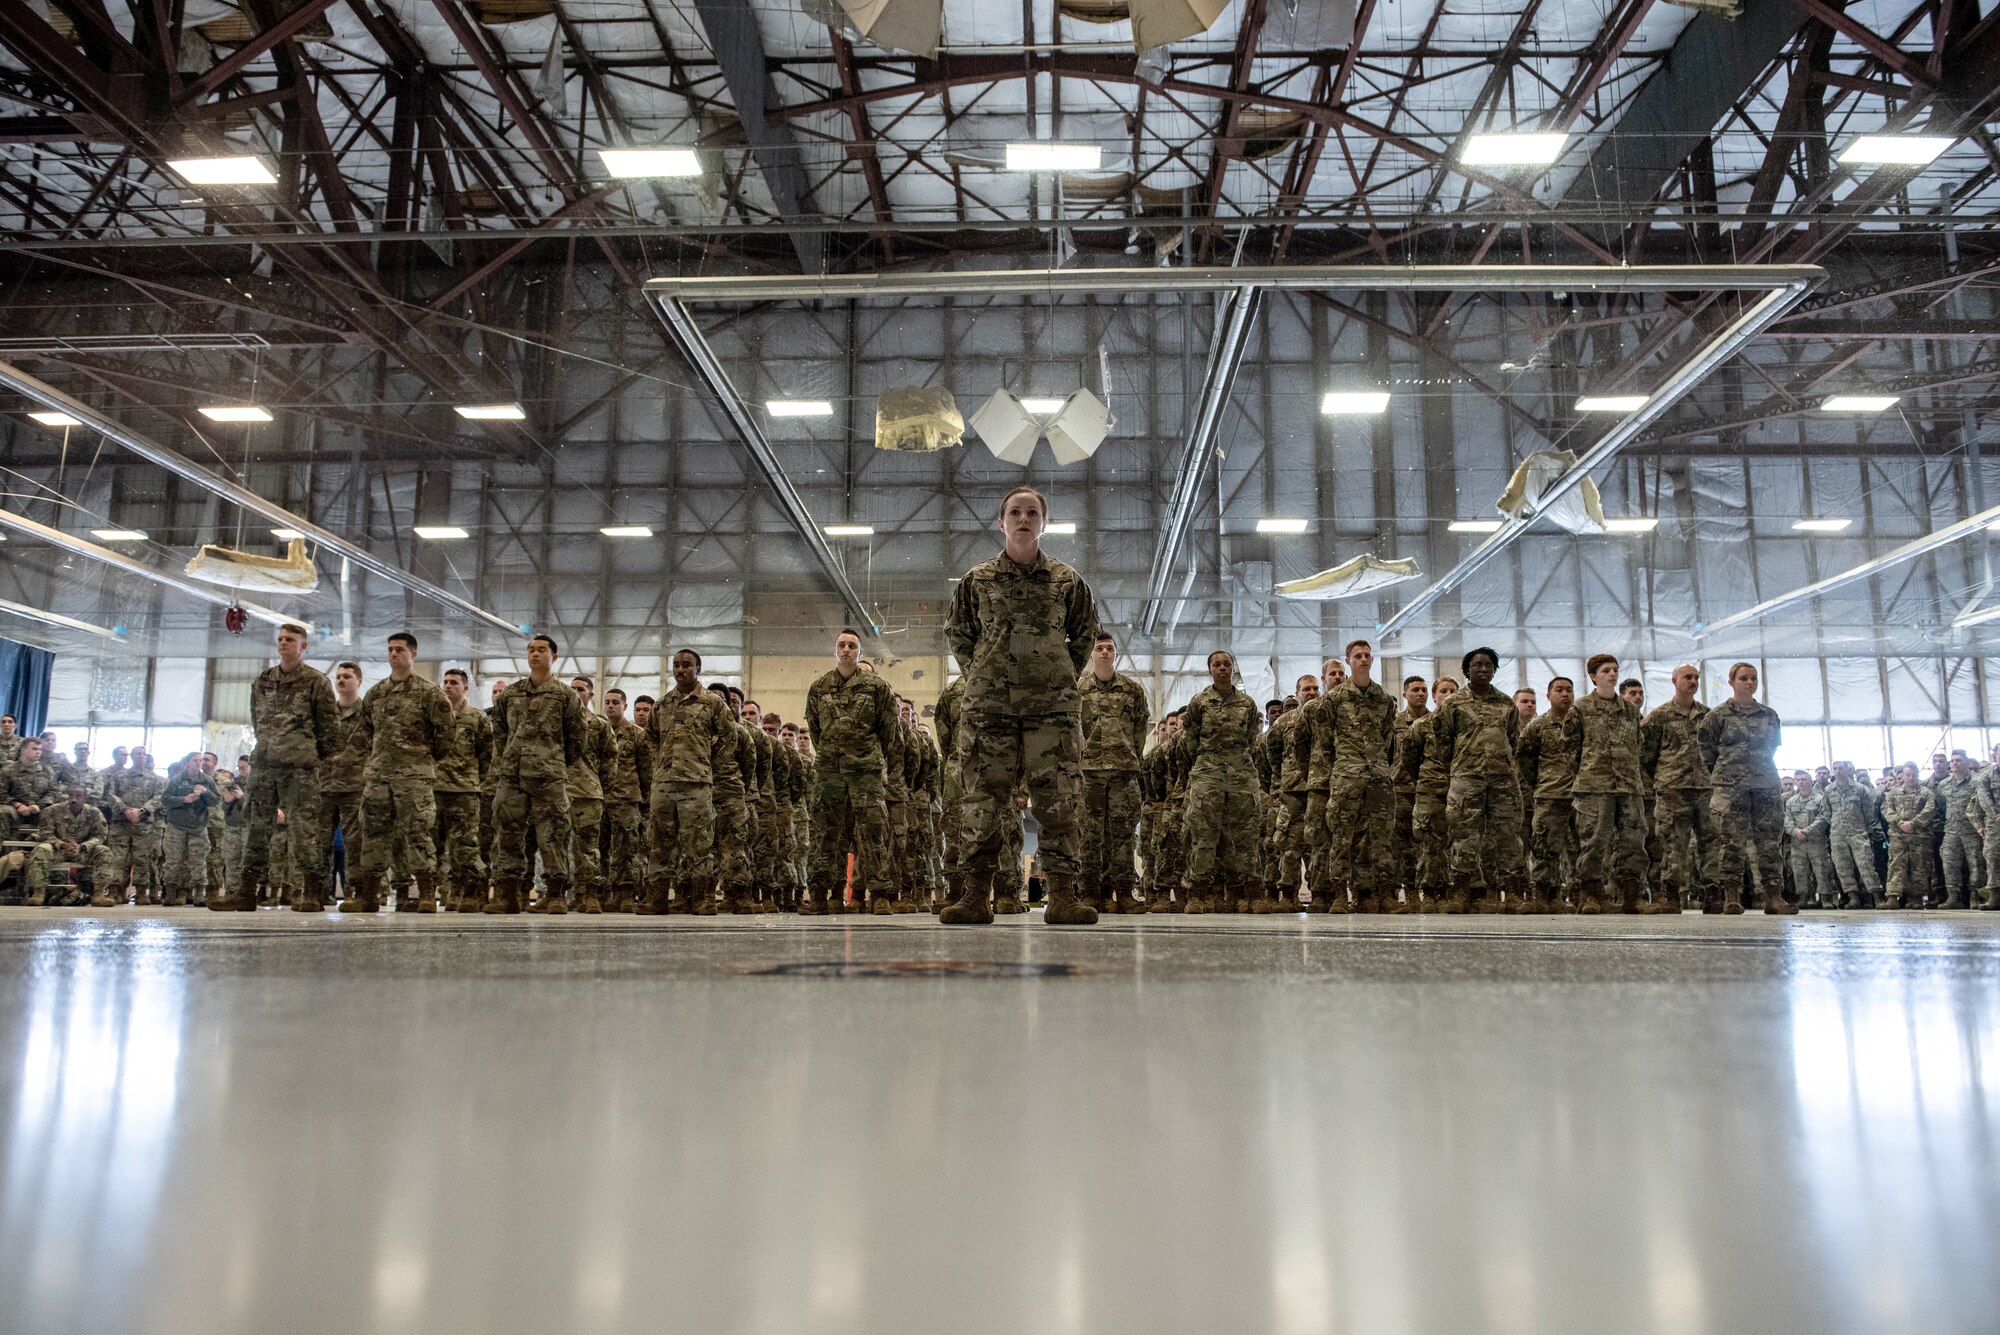 Airmen assigned to the 20th Aircraft Maintenance Squadron (AMXS) stand at parade rest awaiting the reorganization of the squadron during a squadron stand-up ceremony at Shaw Air Force Base, South Carolina, Feb. 24, 2020.